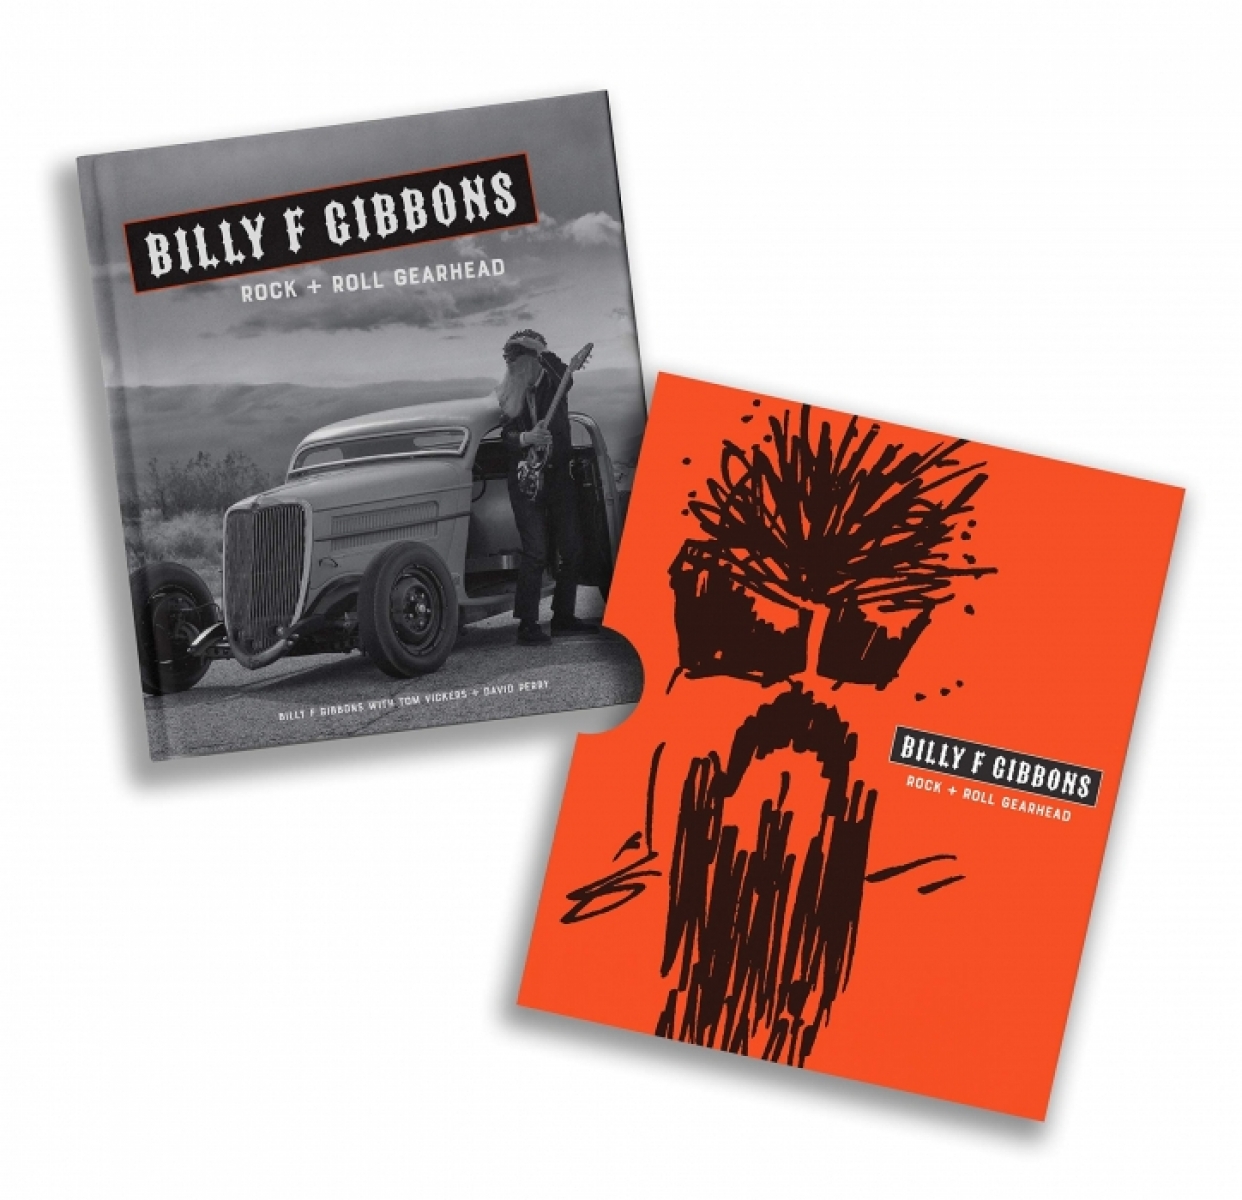 Gibbons Billy F., Vickers Tom Billy F Gibbons: Rock + Roll Gearhead 